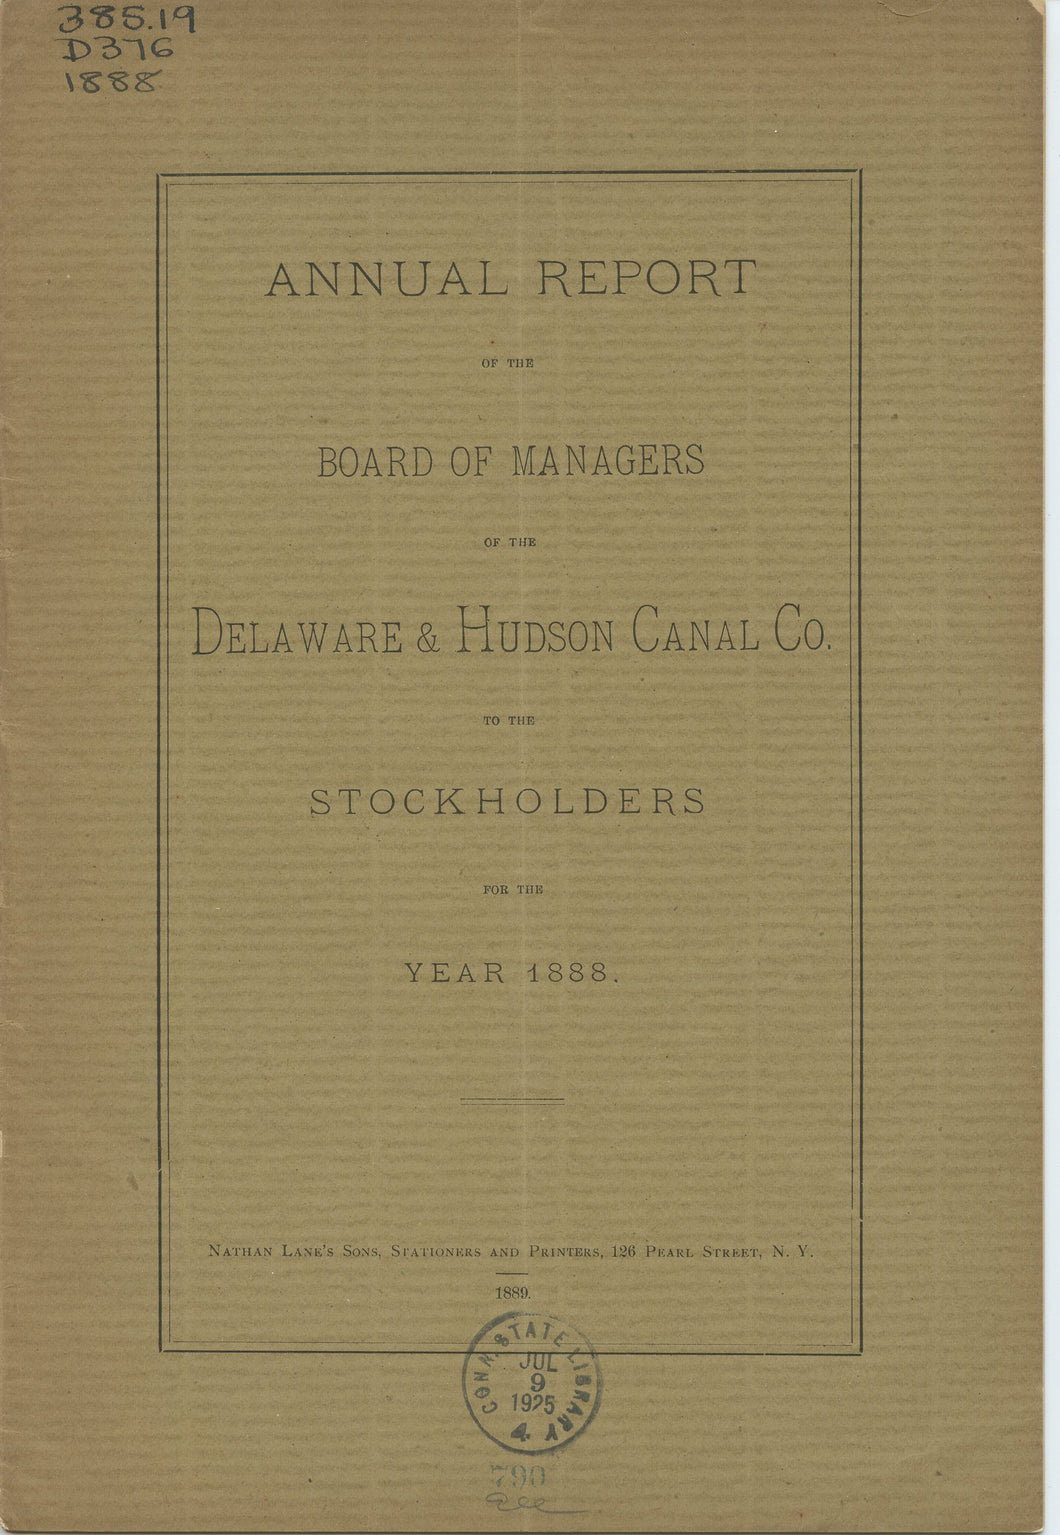 Annual Report of the Board of Managers of the Delaware & Hudson Canal Co. to the Stockholders, for the Year 1888